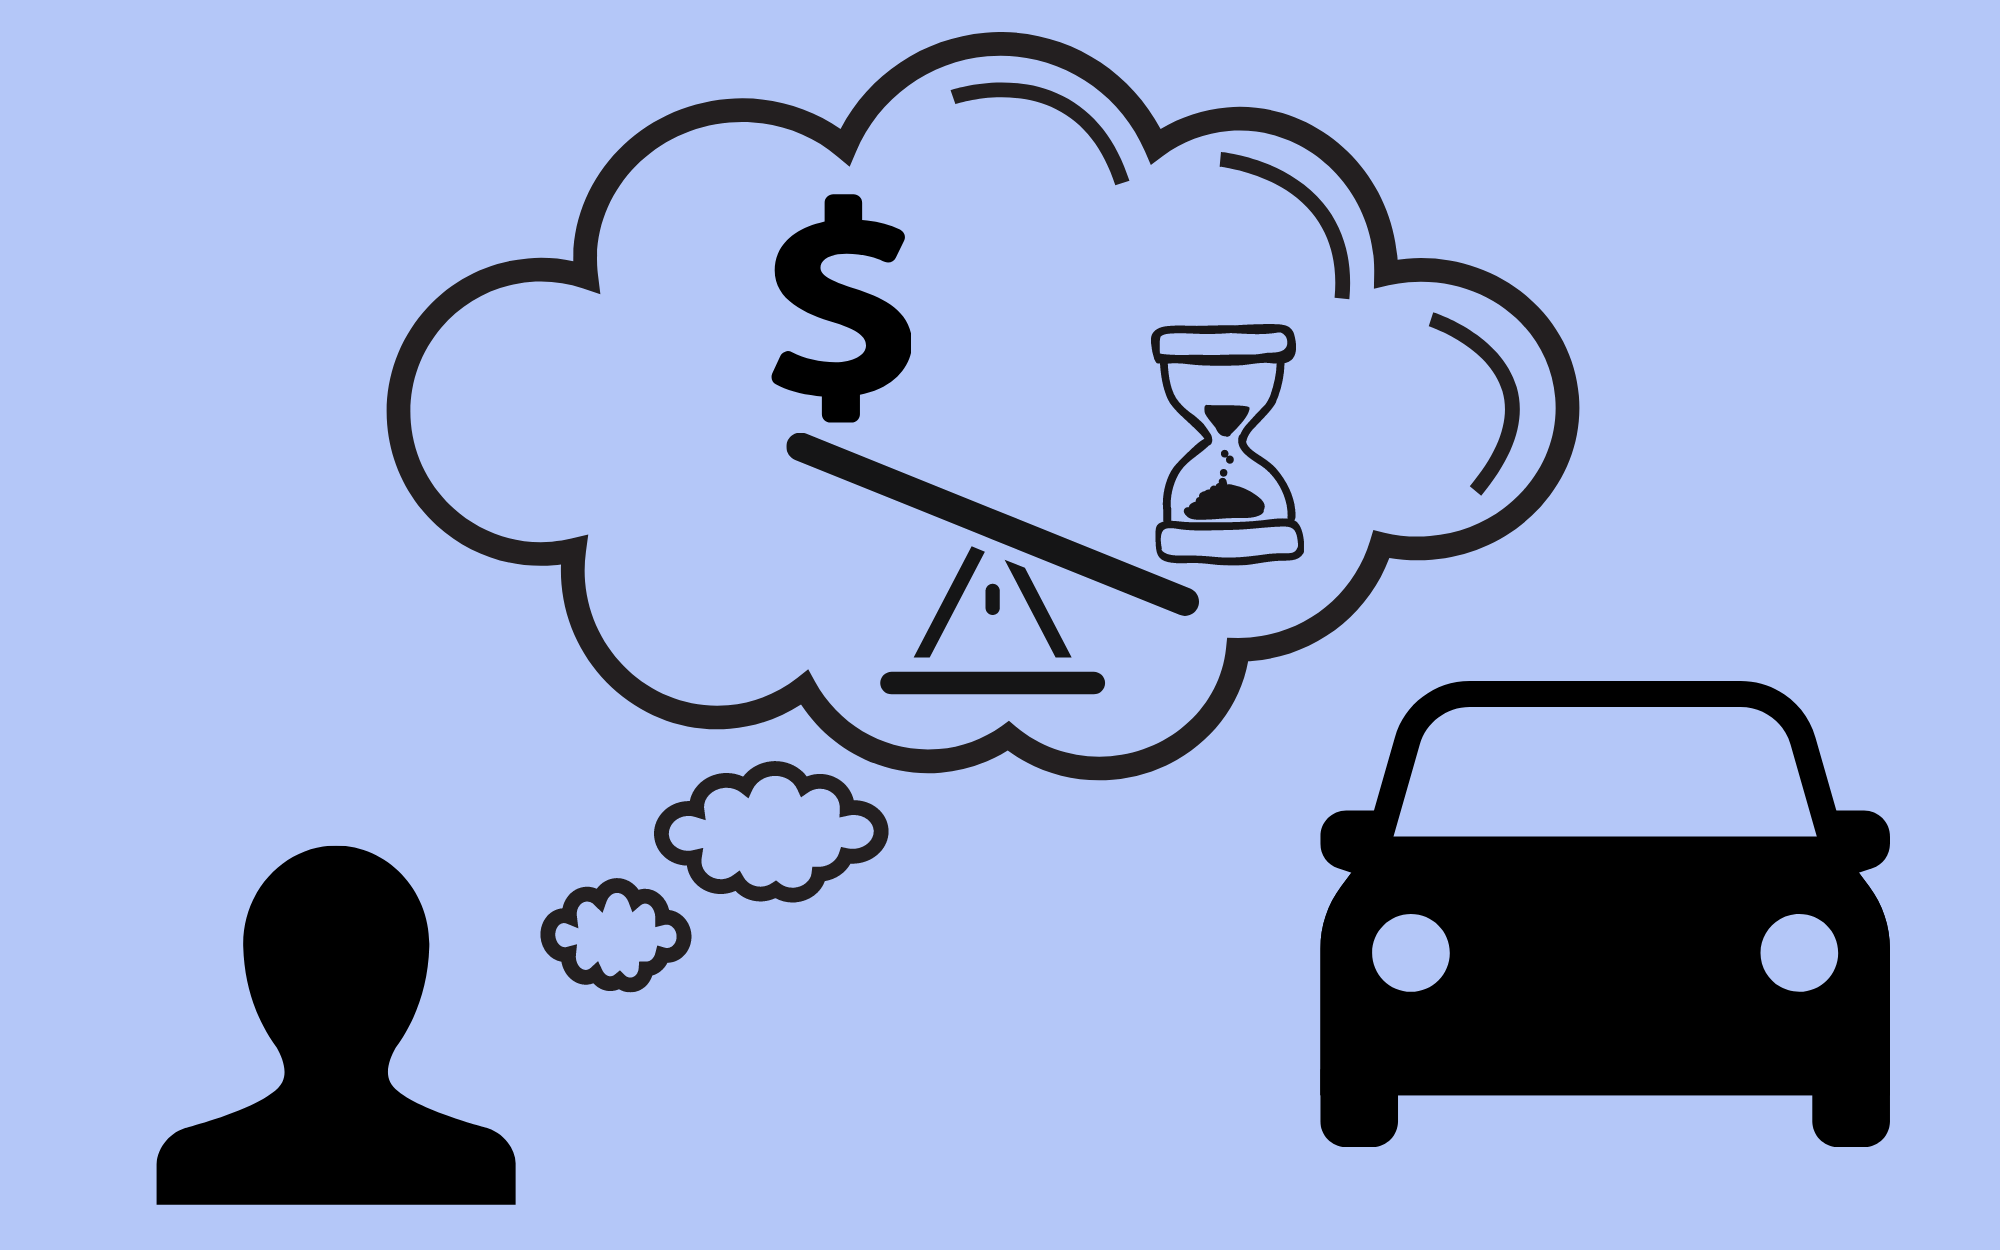 Illustration of a person next to a car with a thought bubble containing a scale weighing money and time